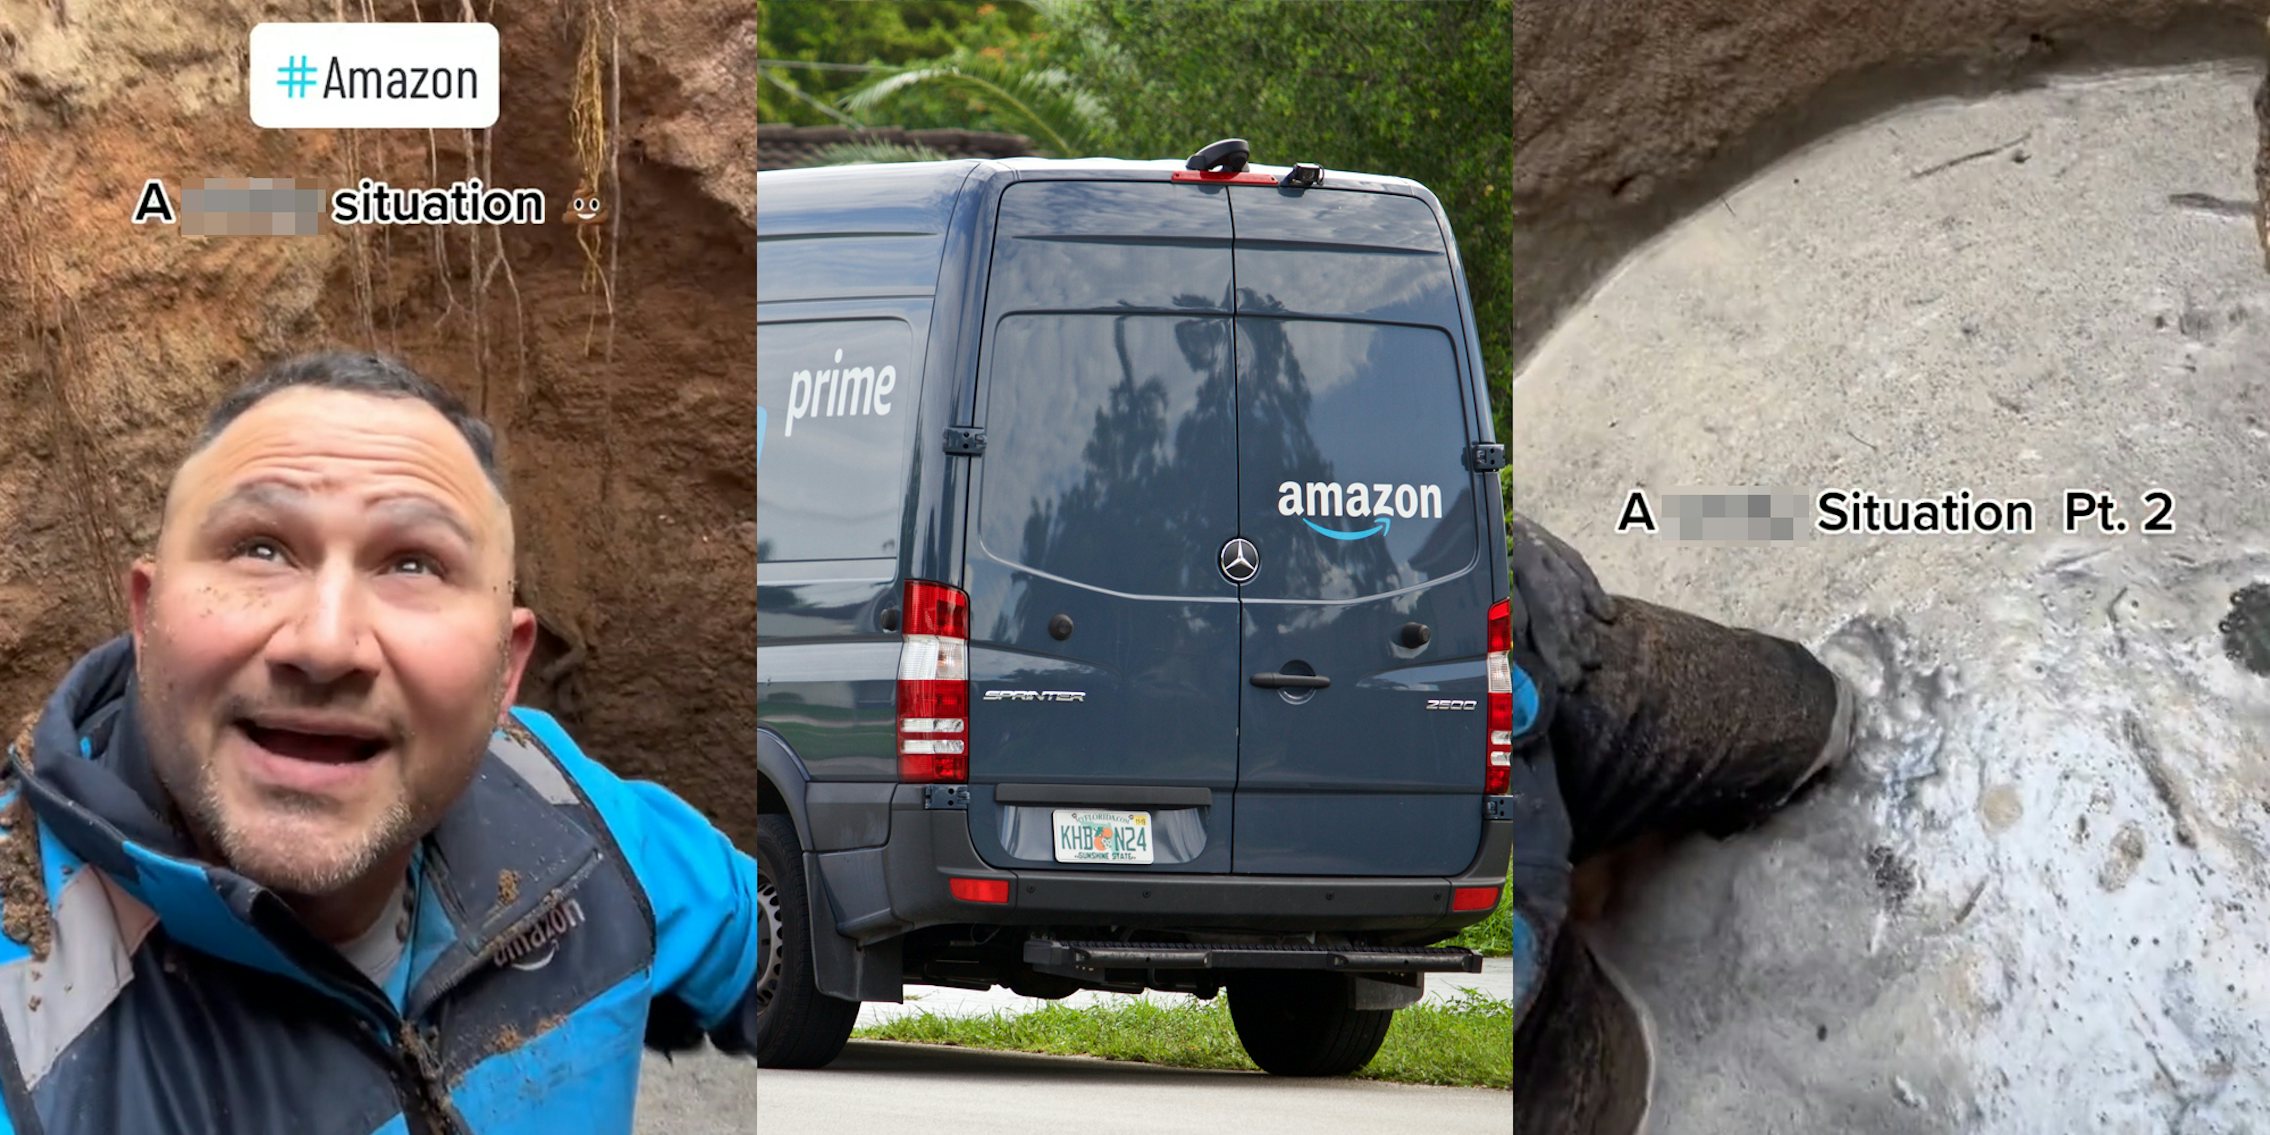 Amazon delivery driver in hole in ground speaking looking up with caption '#Amazon' A blank situation' (l) Amazon delivery truck parked outside of customer's home (c) Amazon delivery driver knees deep in liquid at bottom of hole in ground with caption 'A blank Situation Pt. 2' (r)